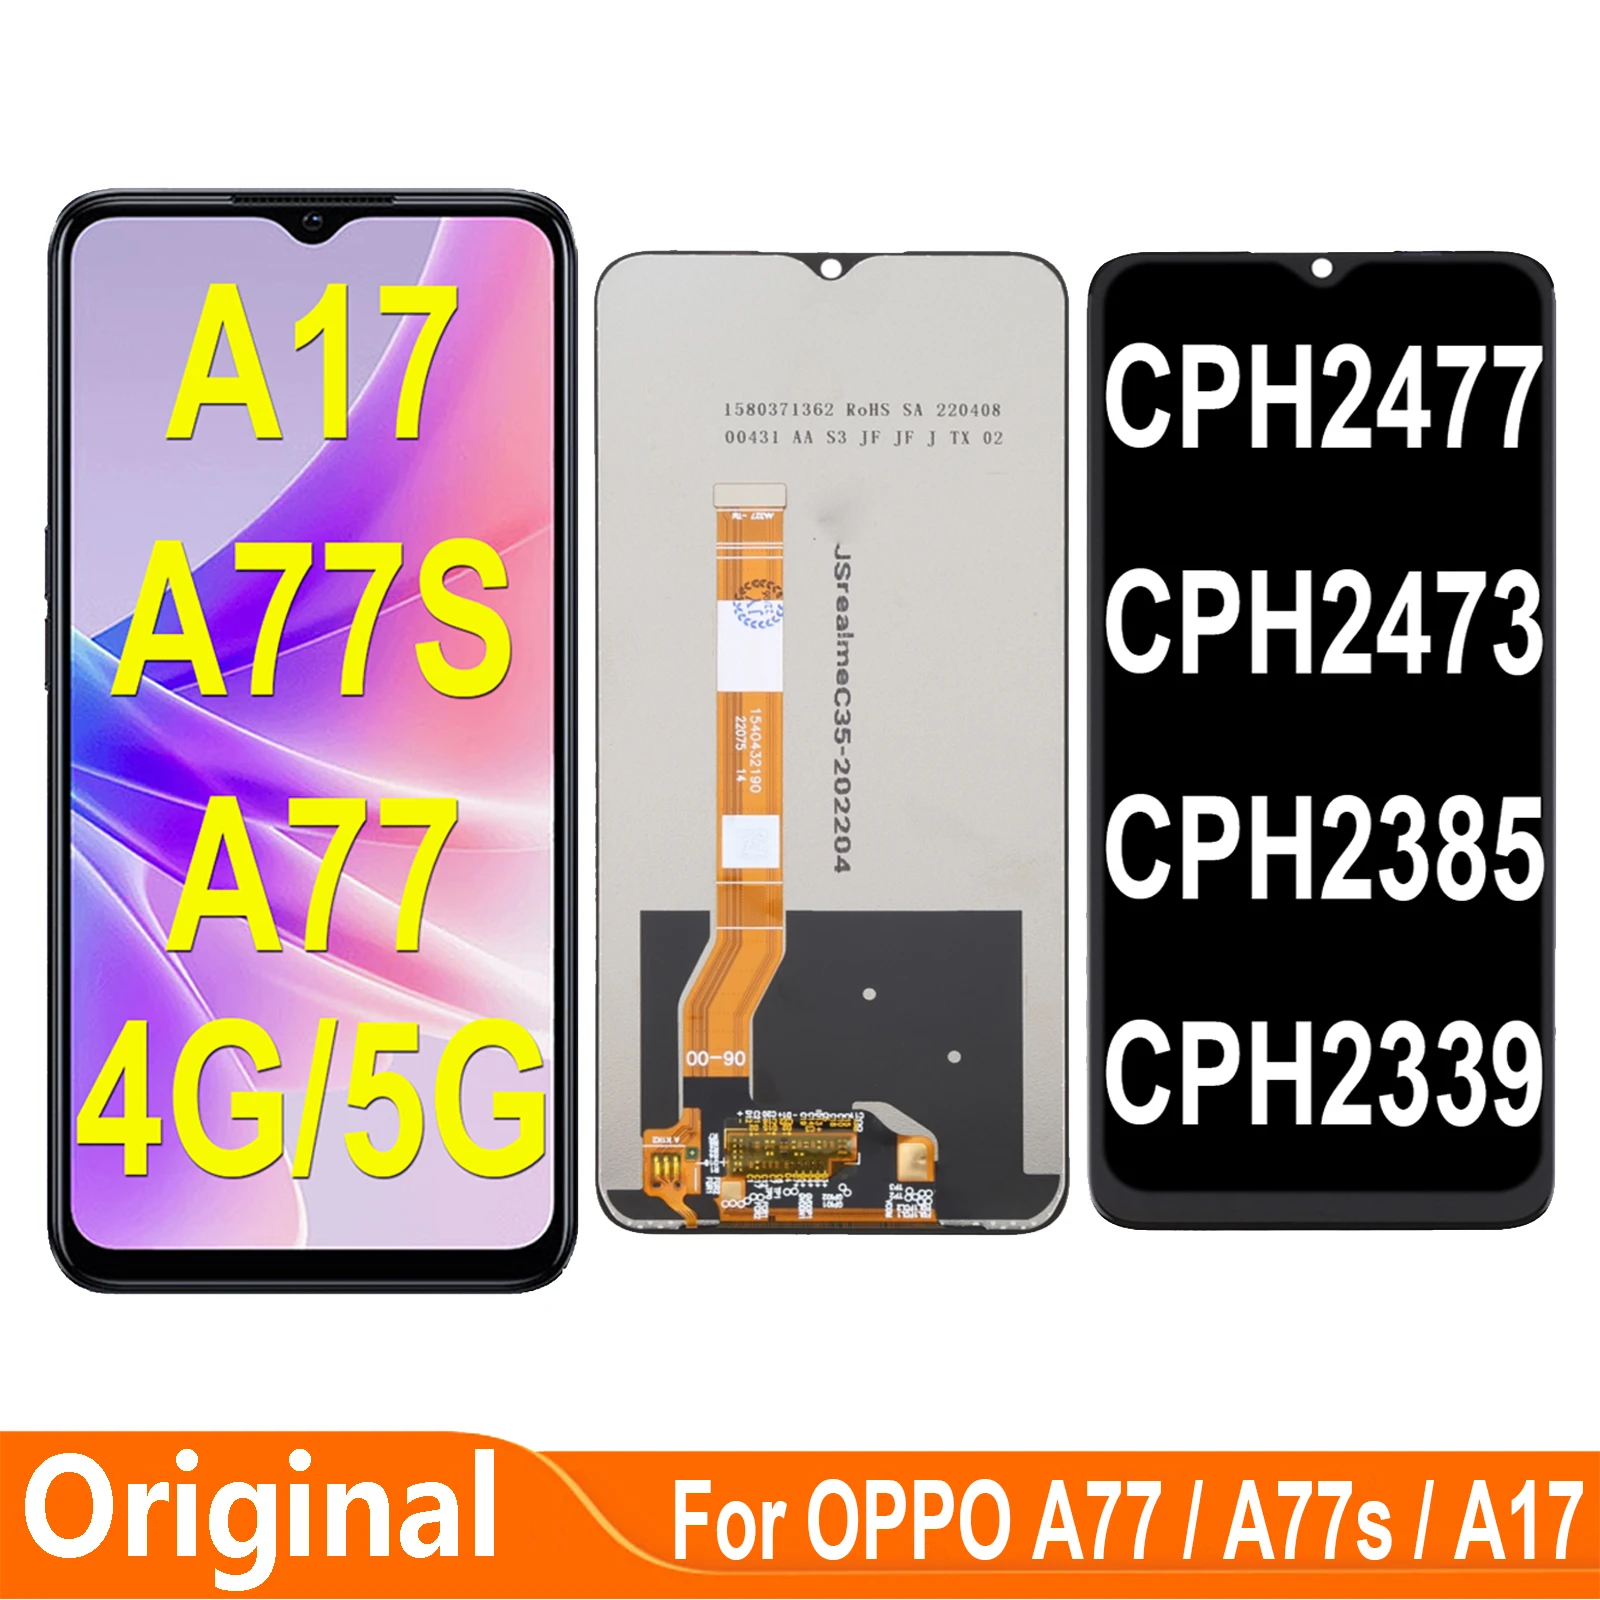 Original-For-OPPO-A77s-CPH2473-A17-CPH2477-LCD-Display-Touch-Screen-Digiziter-Assembly-For-OPPO-A77.jpg_Q90.jpg_